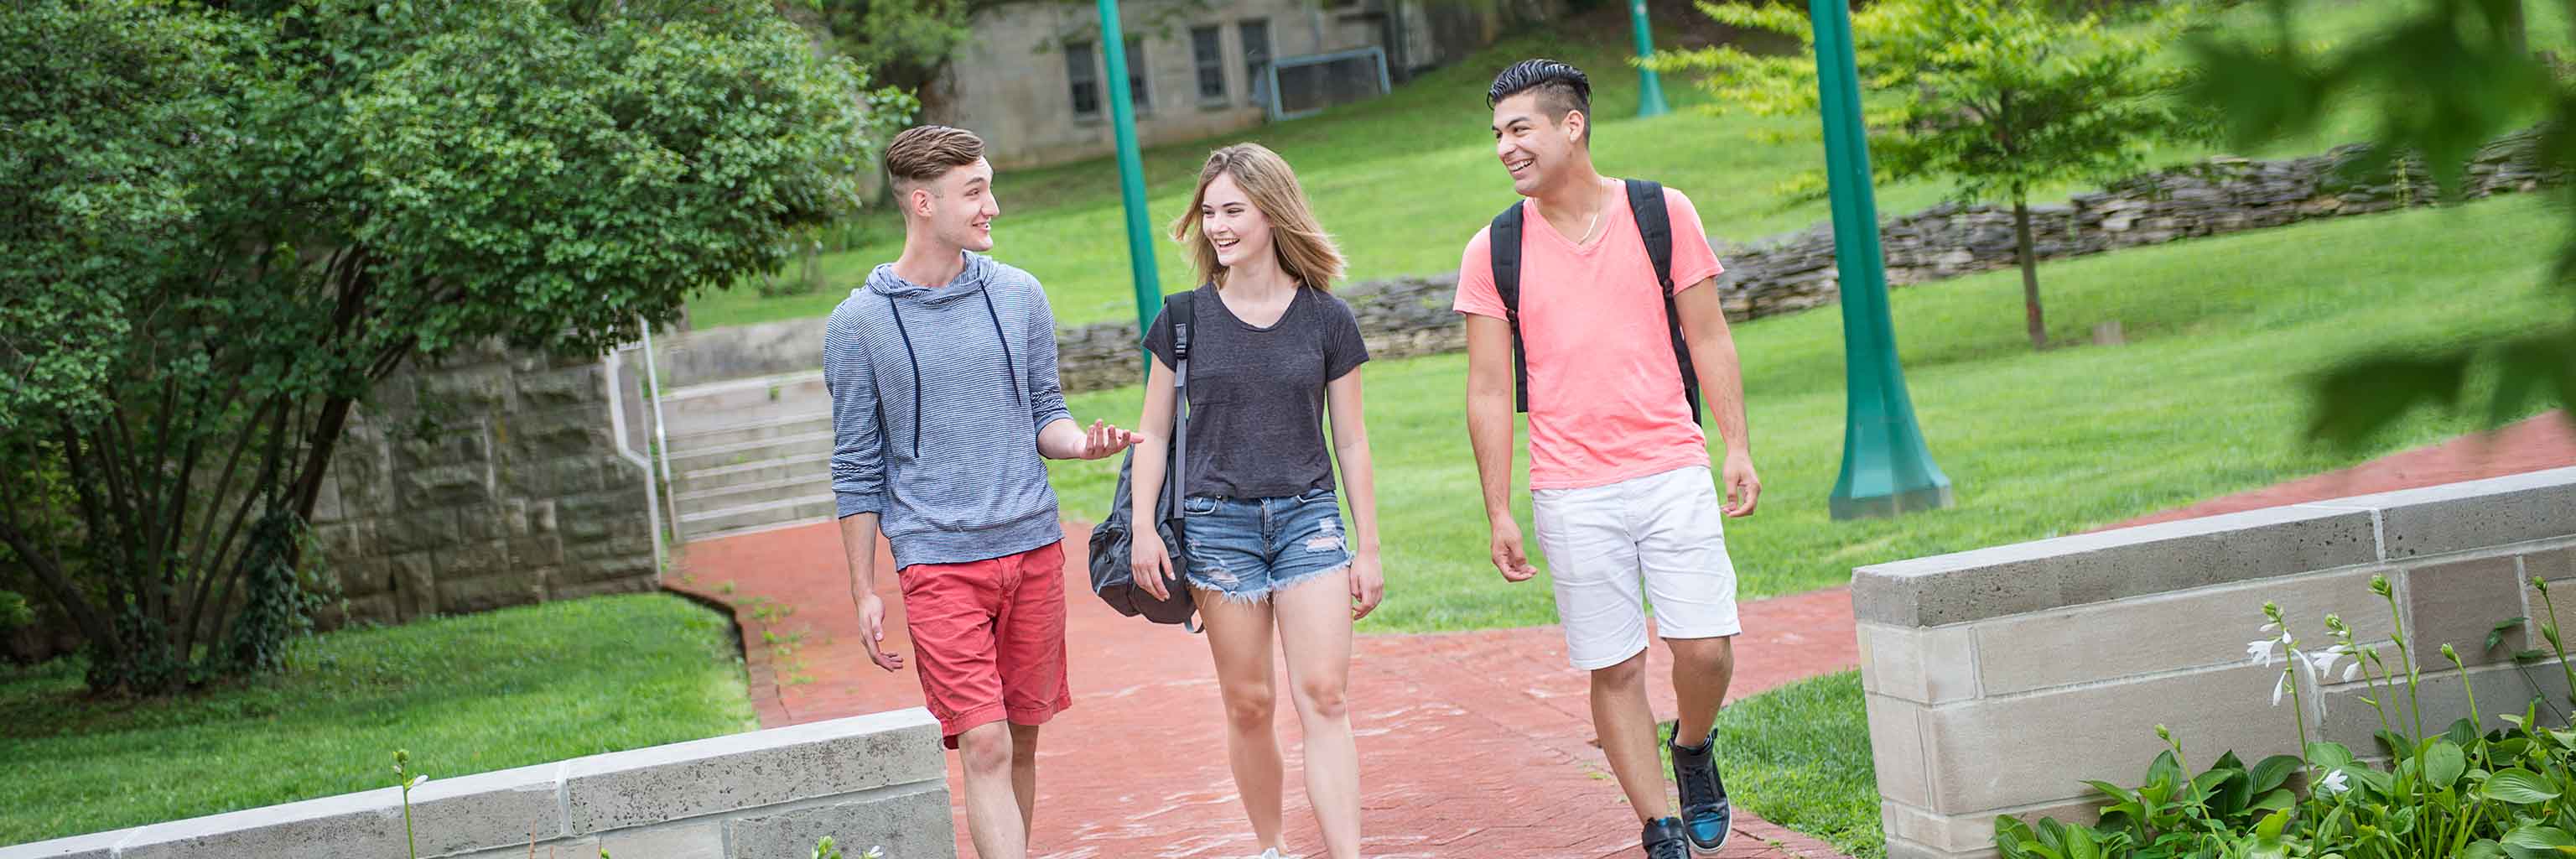 Three students walking side-by-side on campus